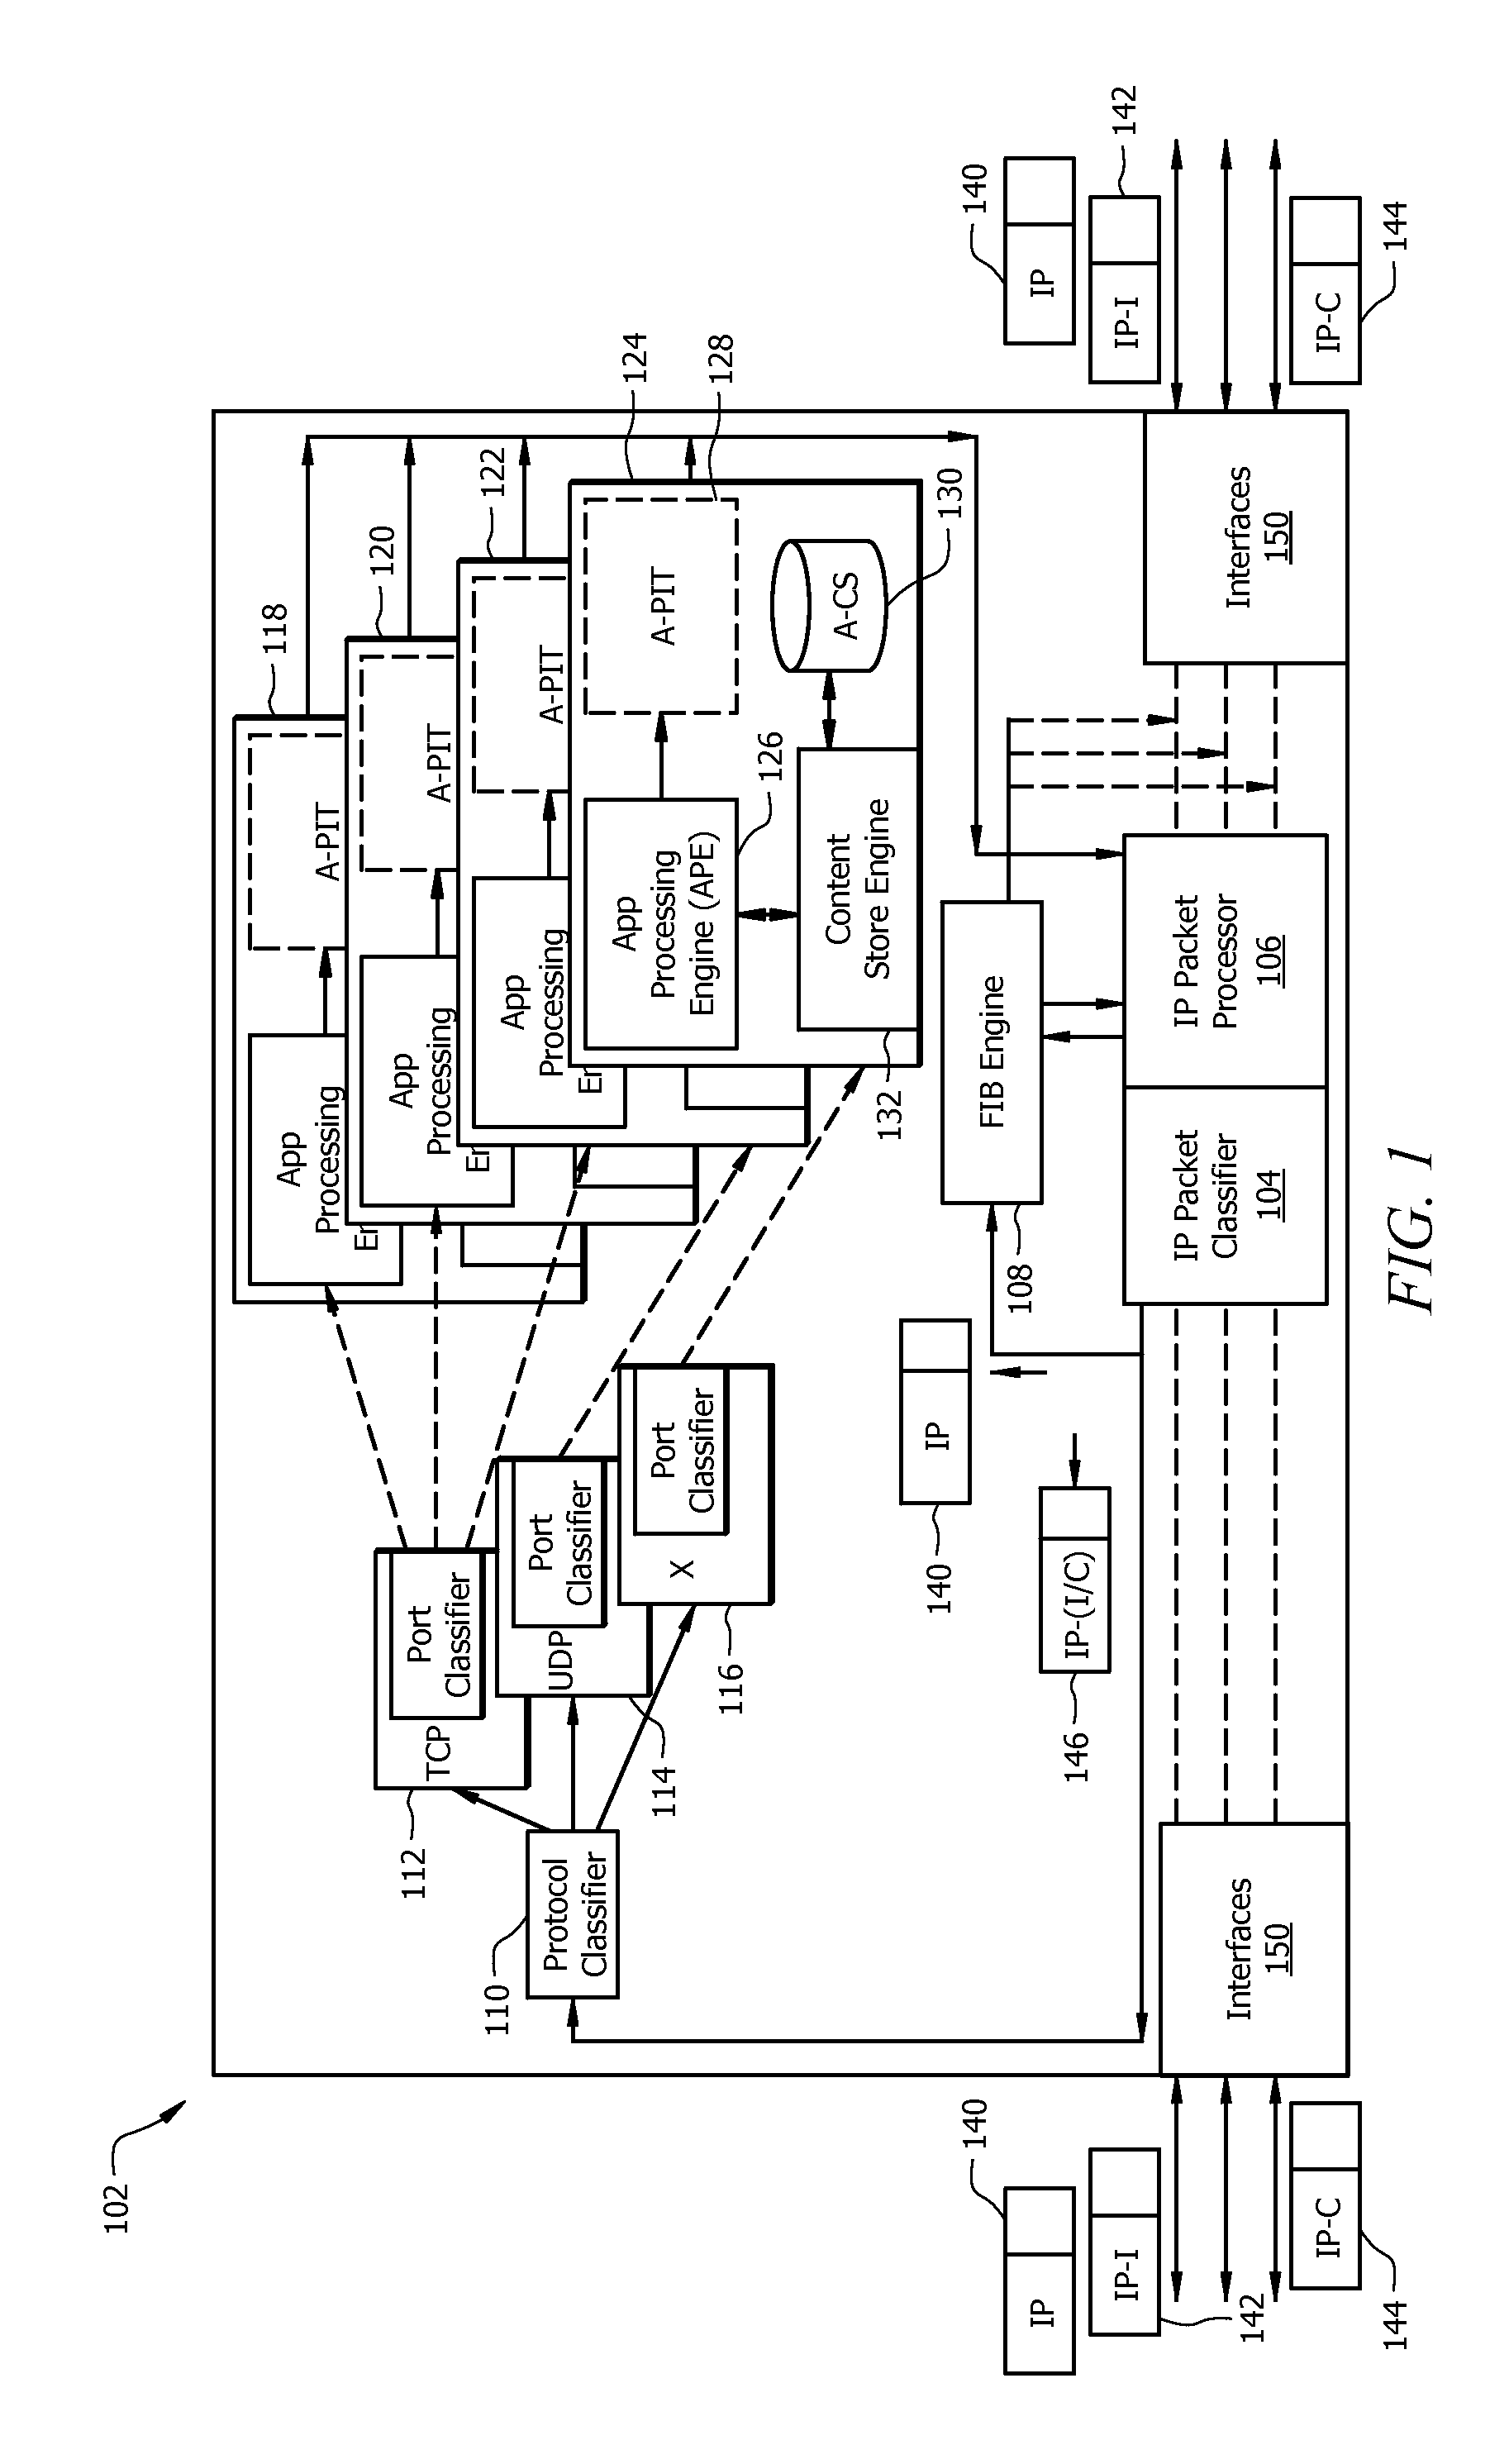 Method and apparatus for internet protocol based content router